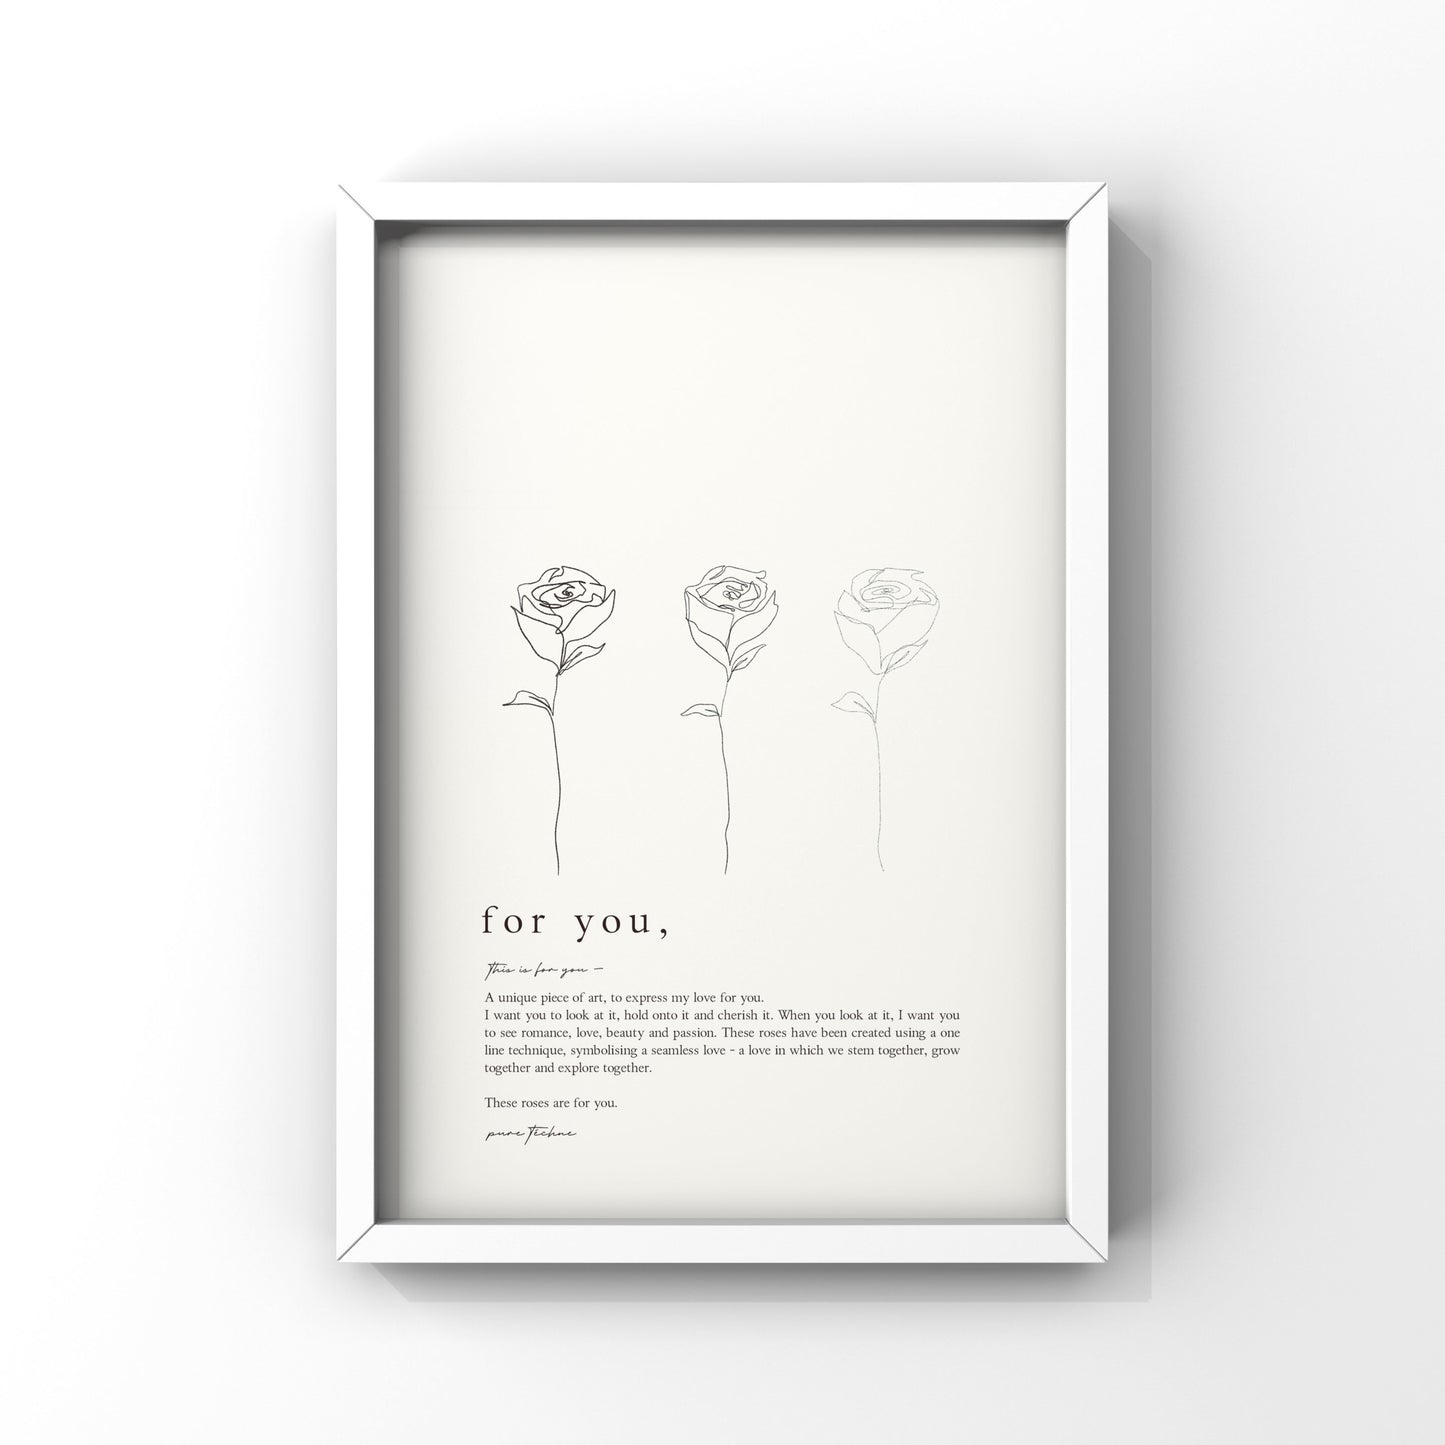 a personalised art piece and illustration for your loved one on valentines day - fine line rose art